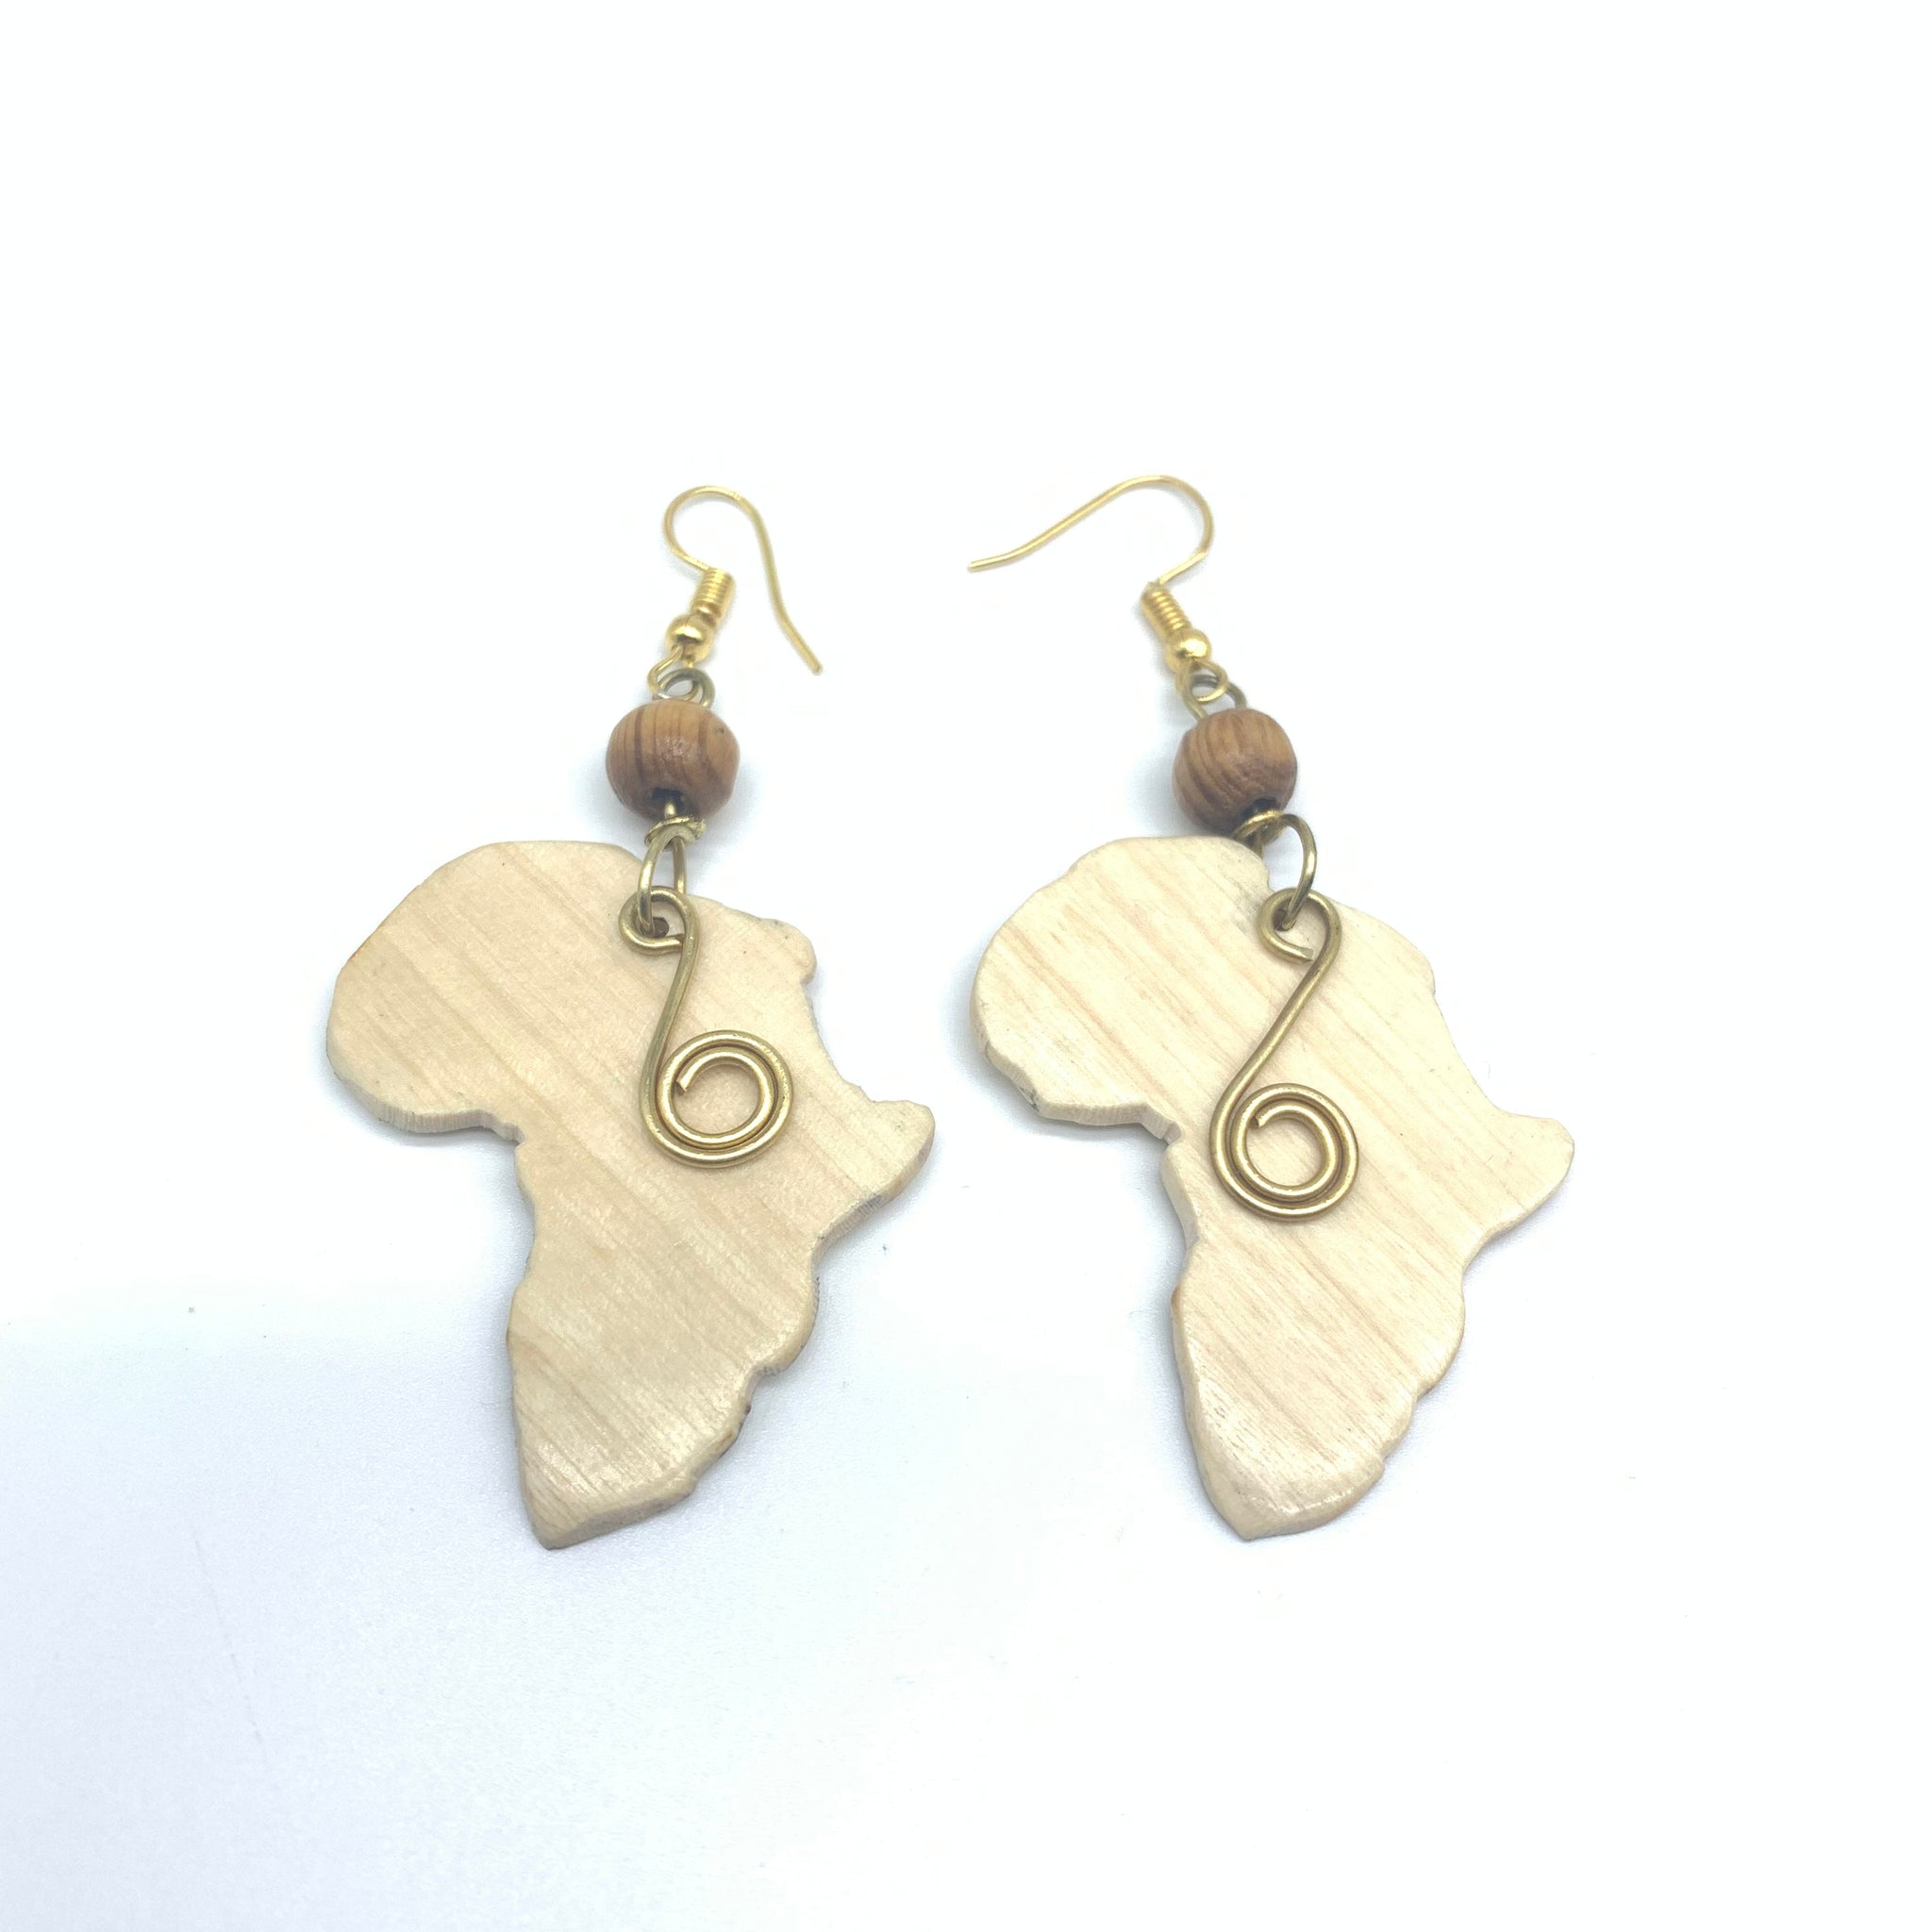 Wood Earrings W/ Metal and Beads-African Continent Natural Variation